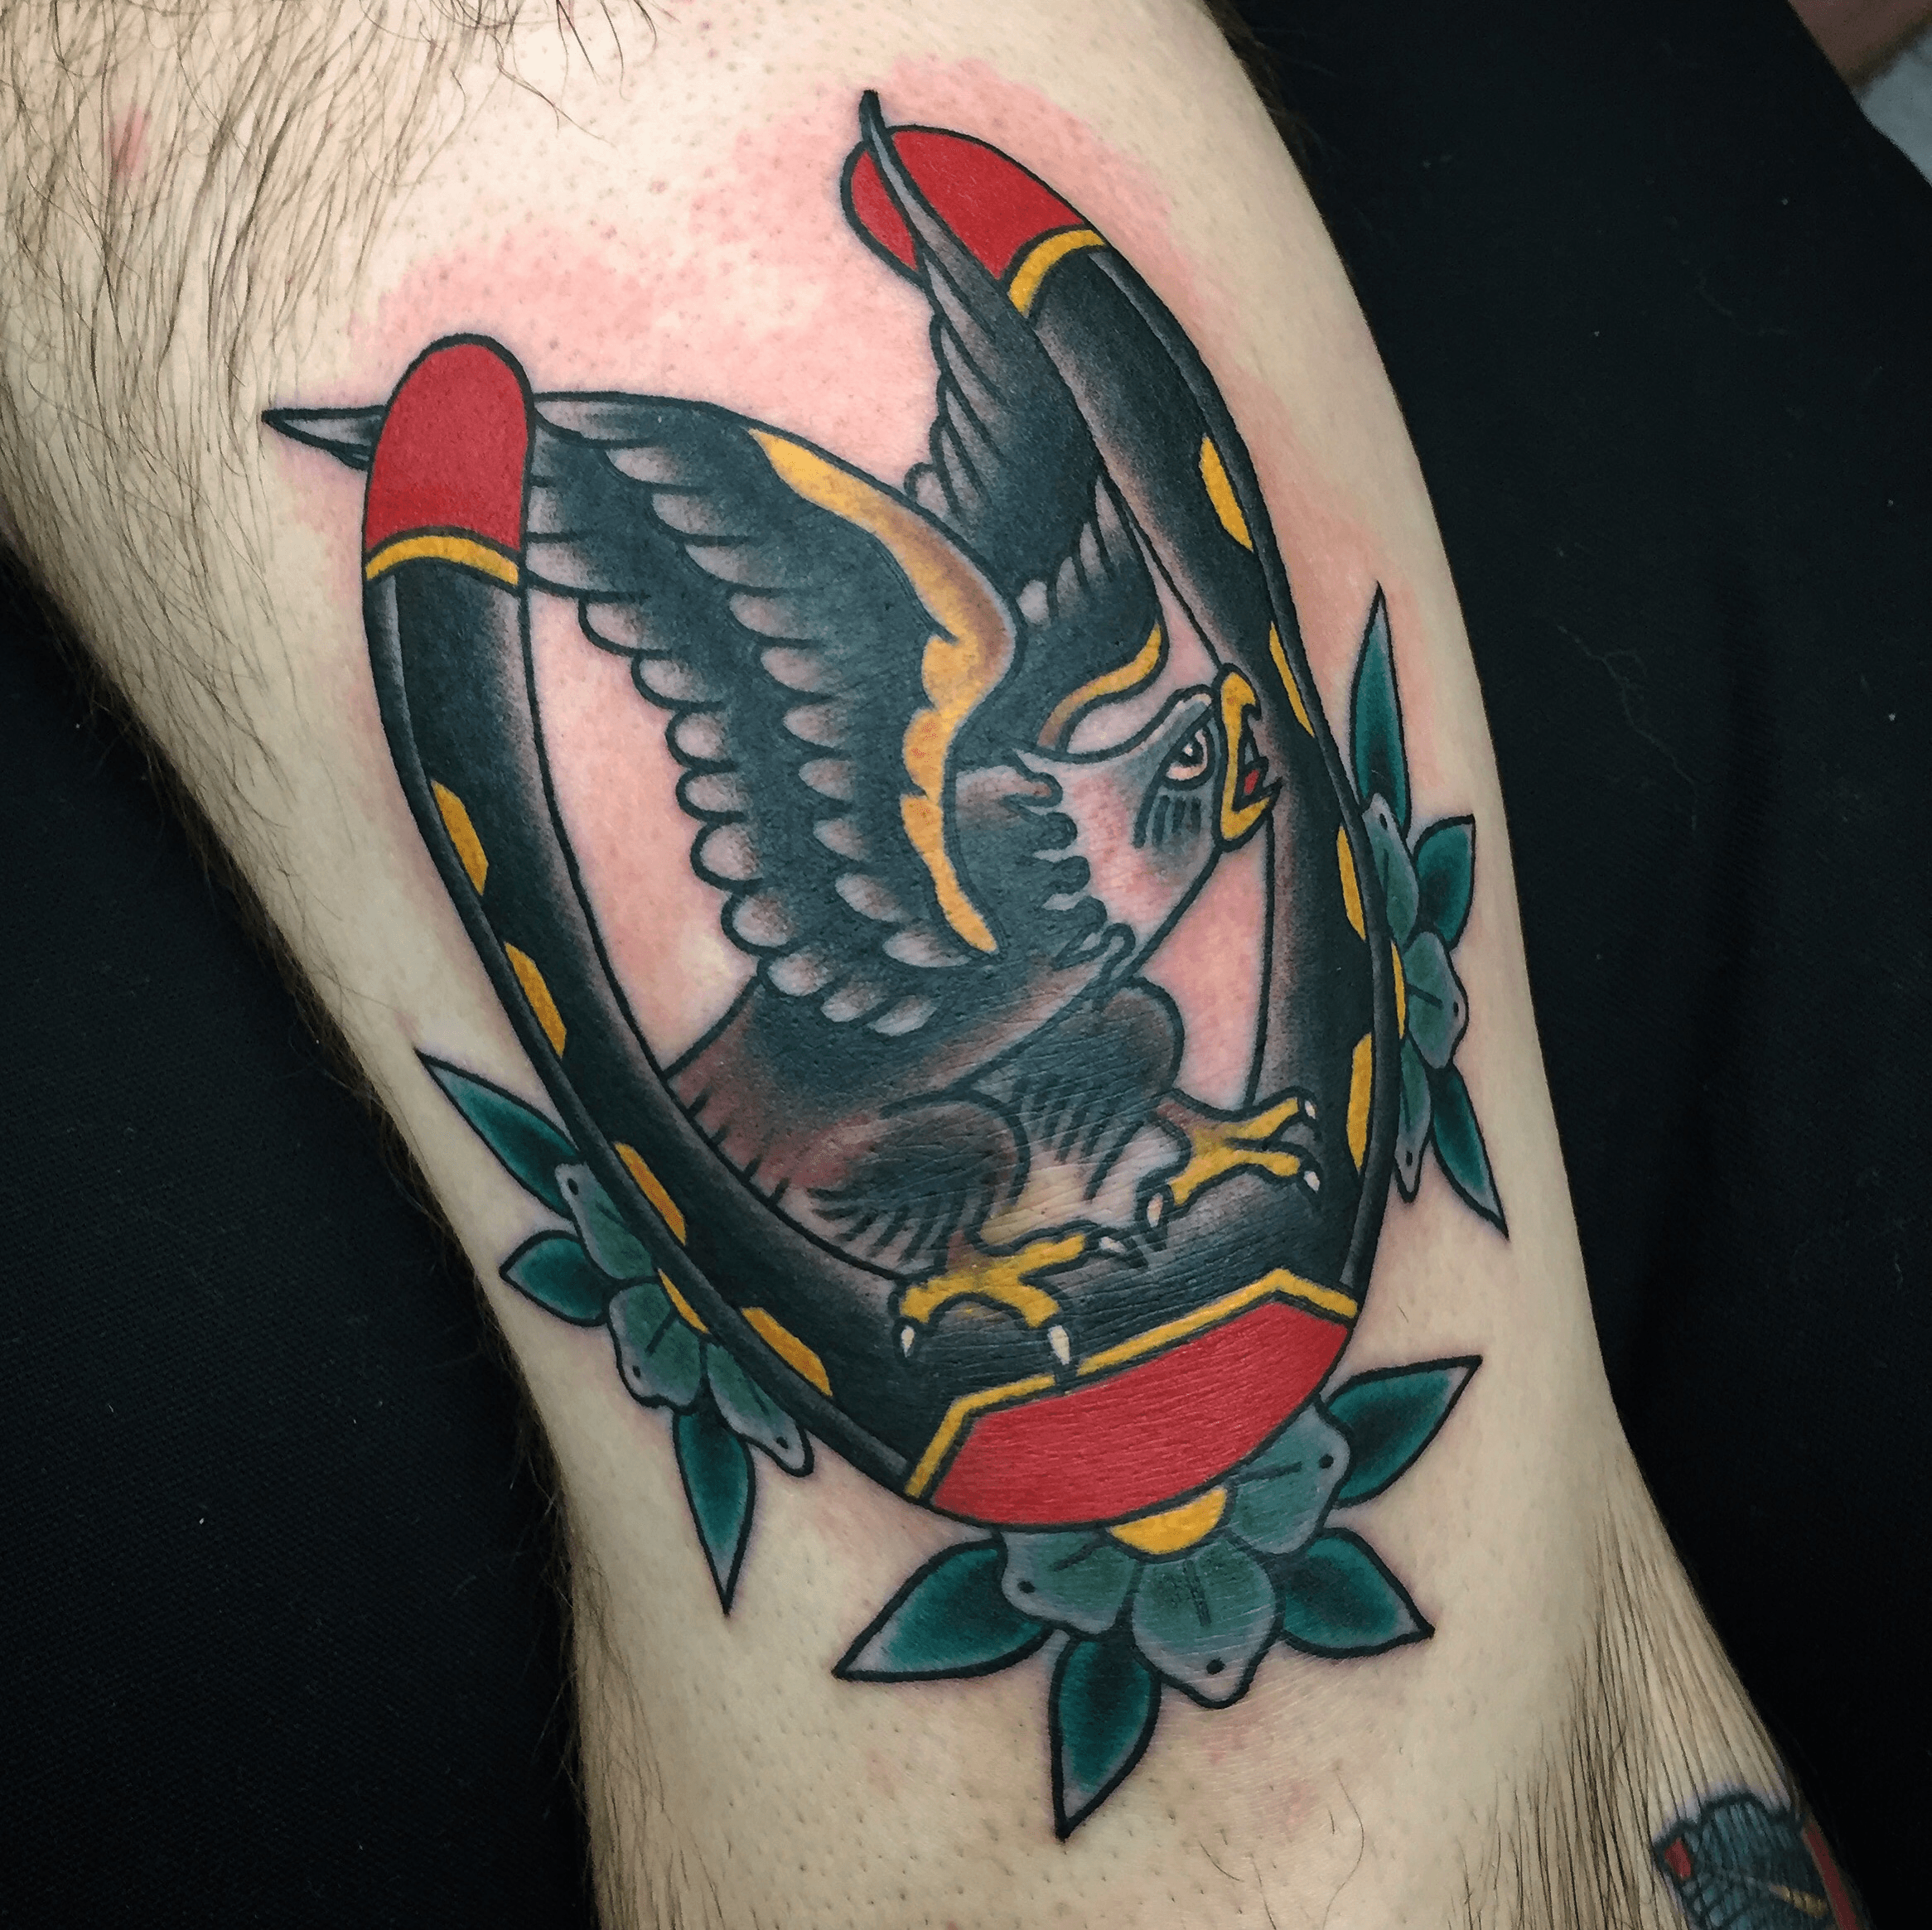 𝓢𝓪𝓶 𝓛𝓲𝓽𝓽𝓵𝓮 on Instagram Check out this gnarly knee eagle wrap  for Paige last week She sat like a boss through the whole thing     tattoos tattoo